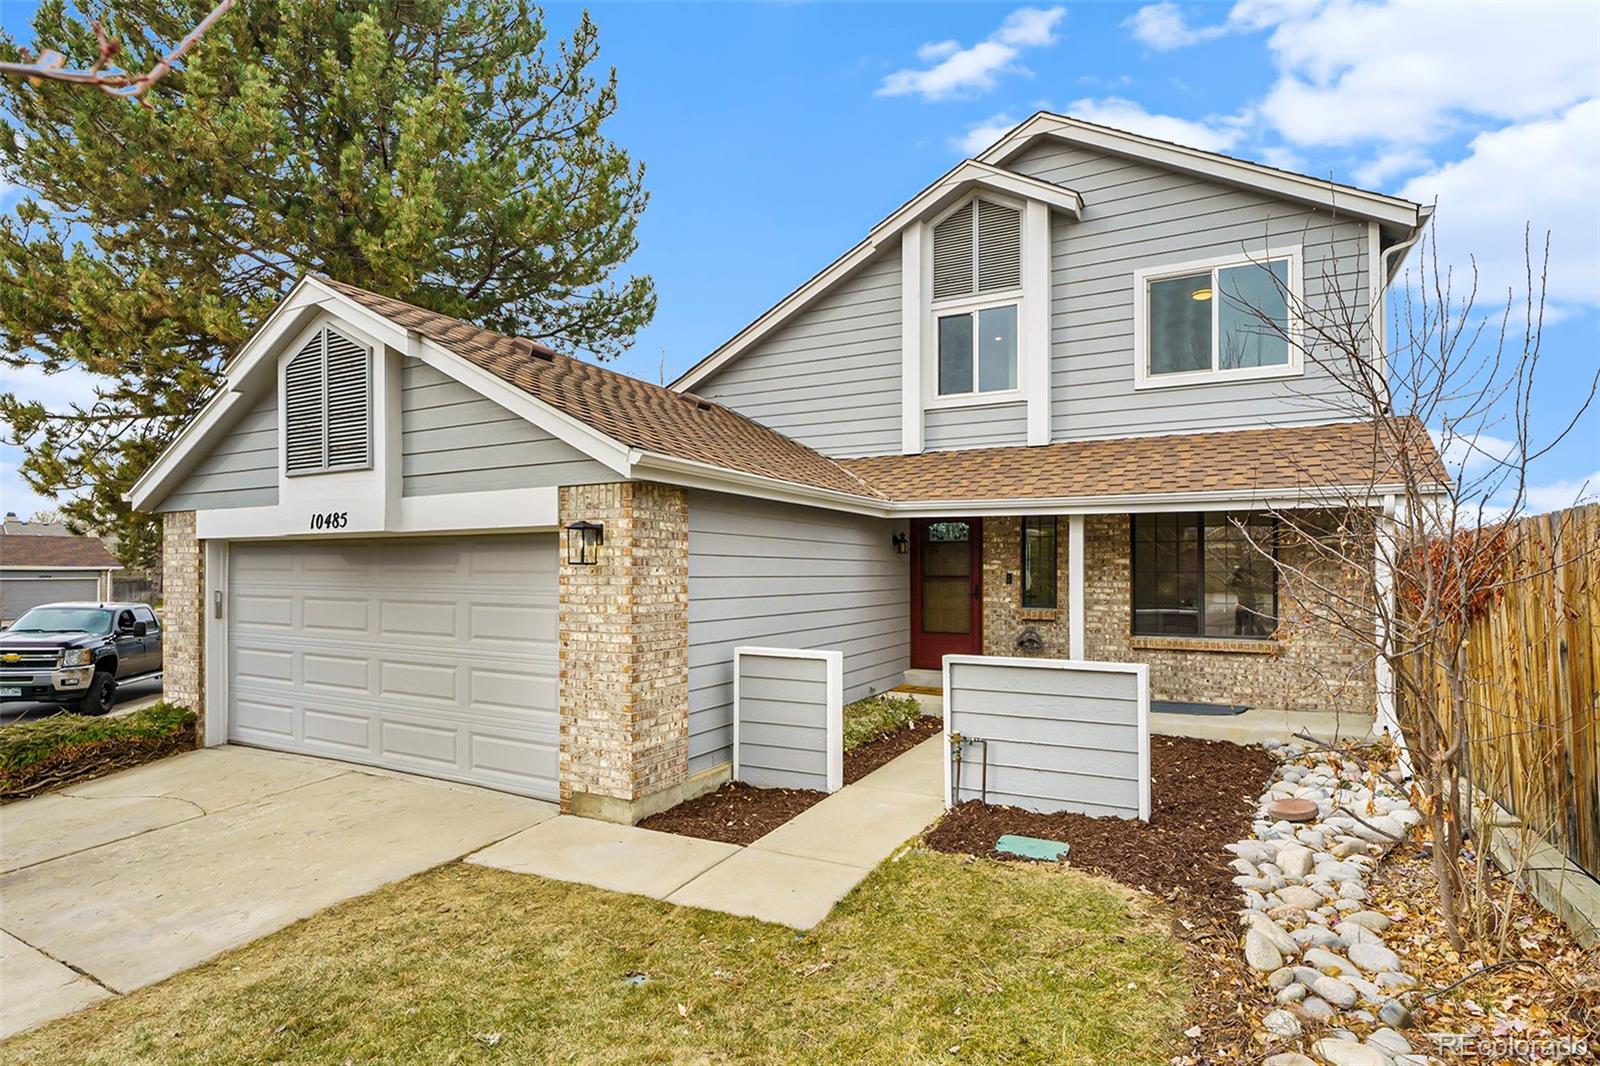 Report Image for 10485 W 85th Place,Arvada, Colorado